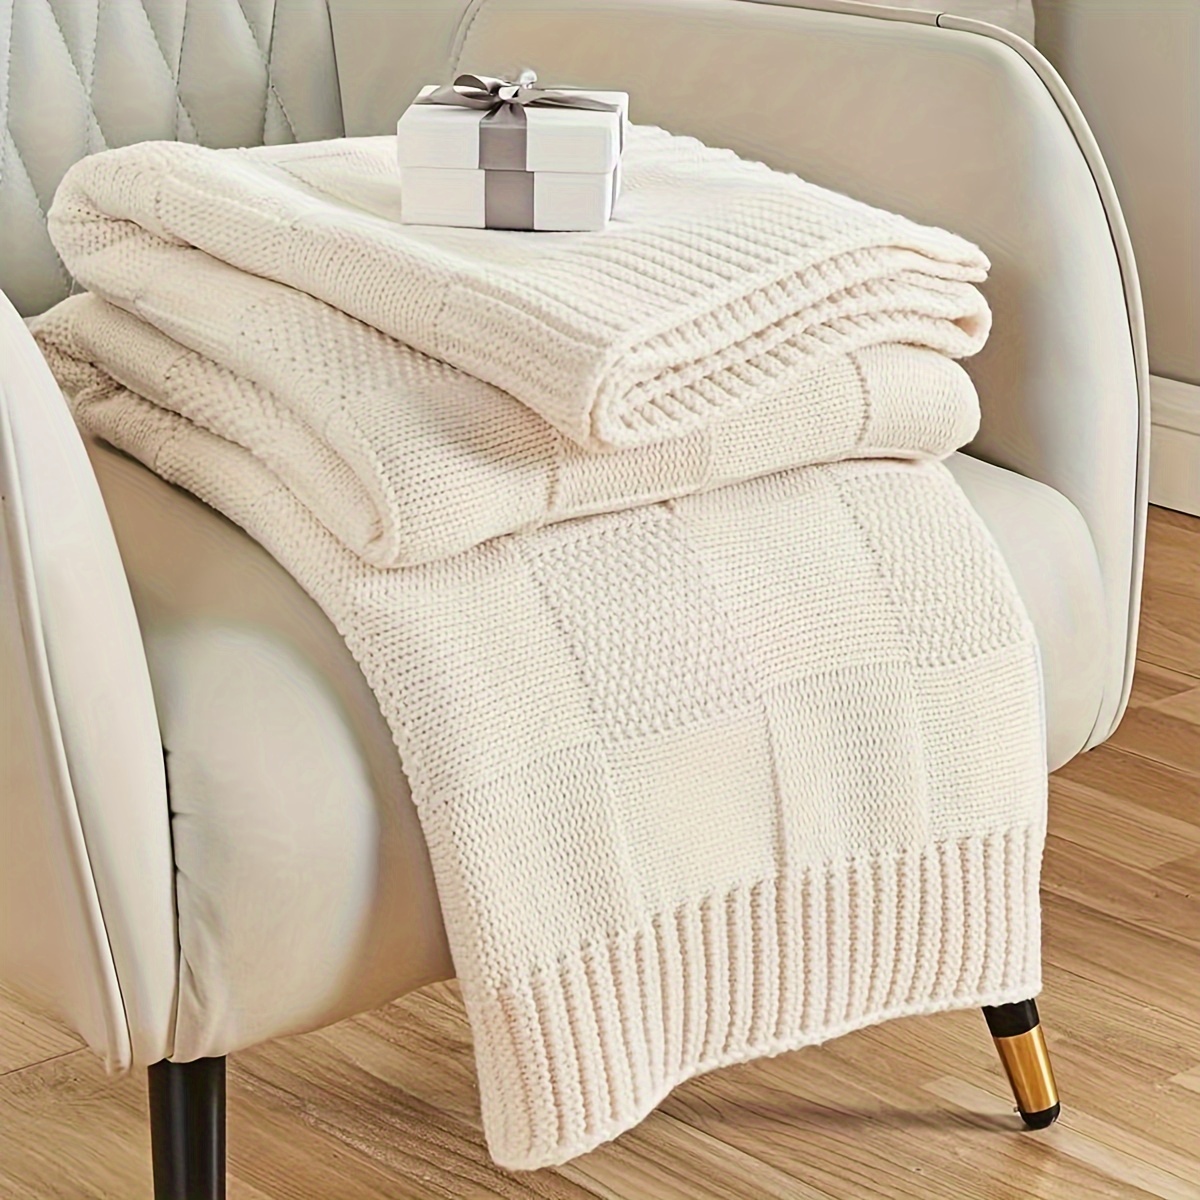 

1pc Knit Throw Blanket, White Checkered Throw Blanket For Couch, Soft Cozy Warm Knitted Throw Blanket For Bed Sofa